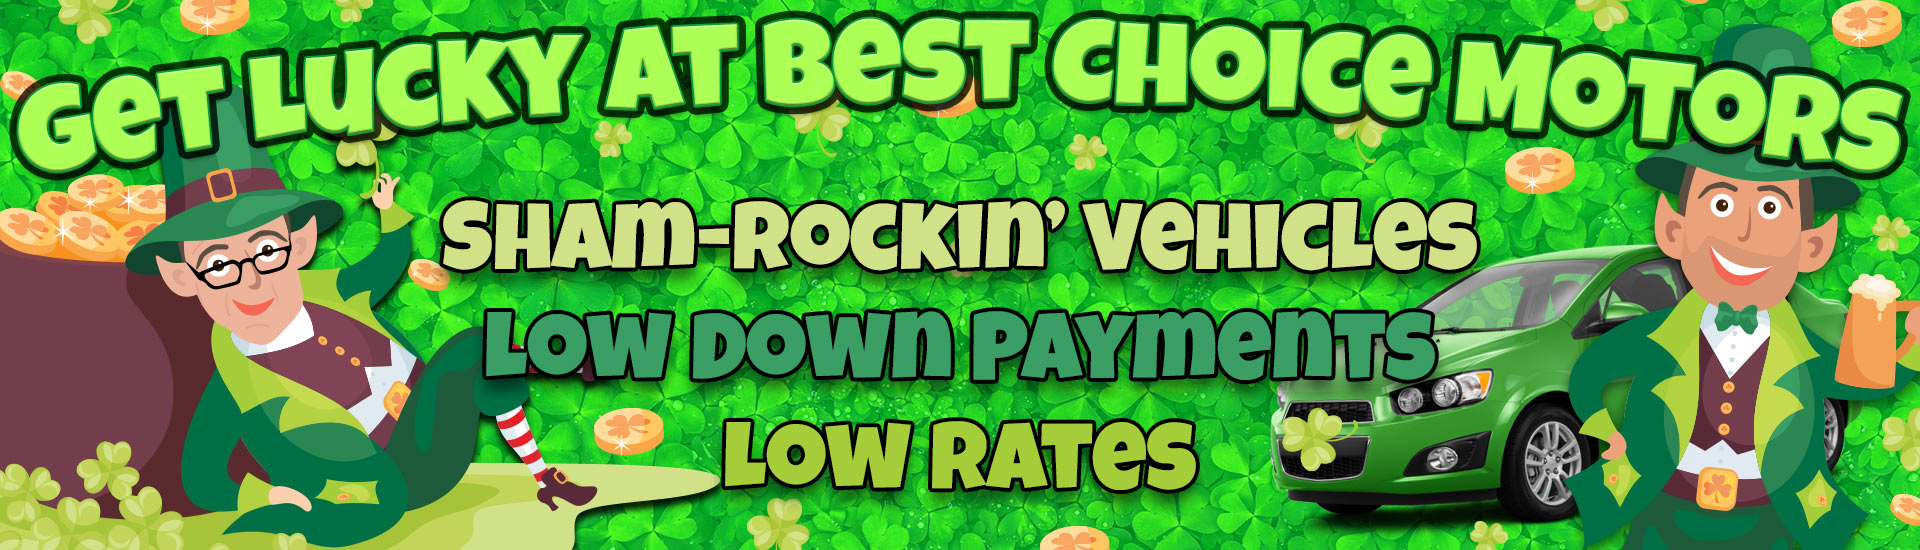 Get Lucky at Best Choice Motors